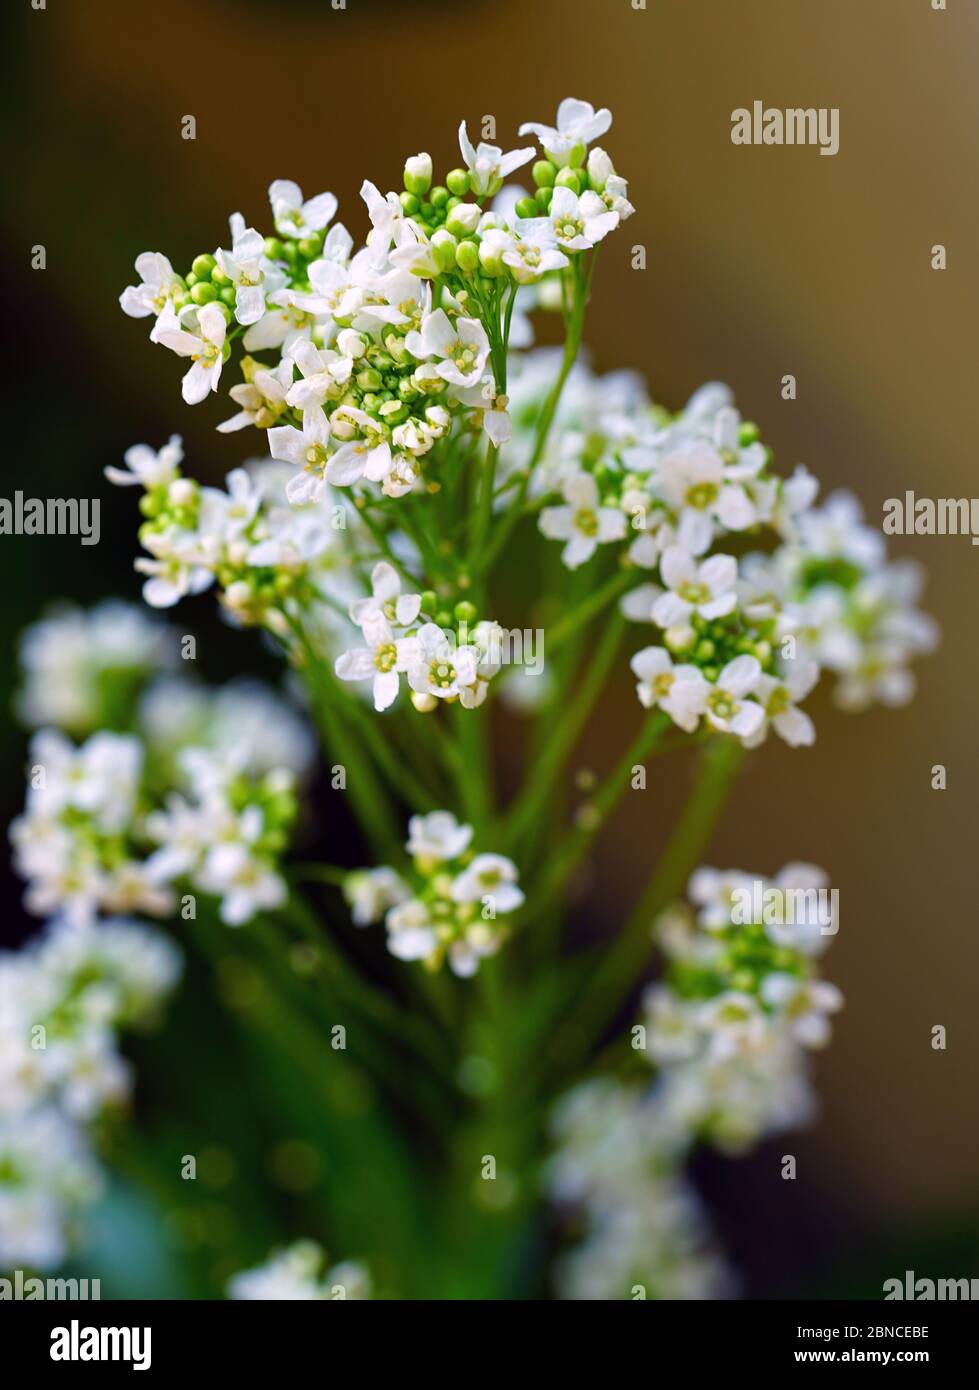 Flowers and leaves of the horseradish plant (armoracia rusticana) Stock Photo